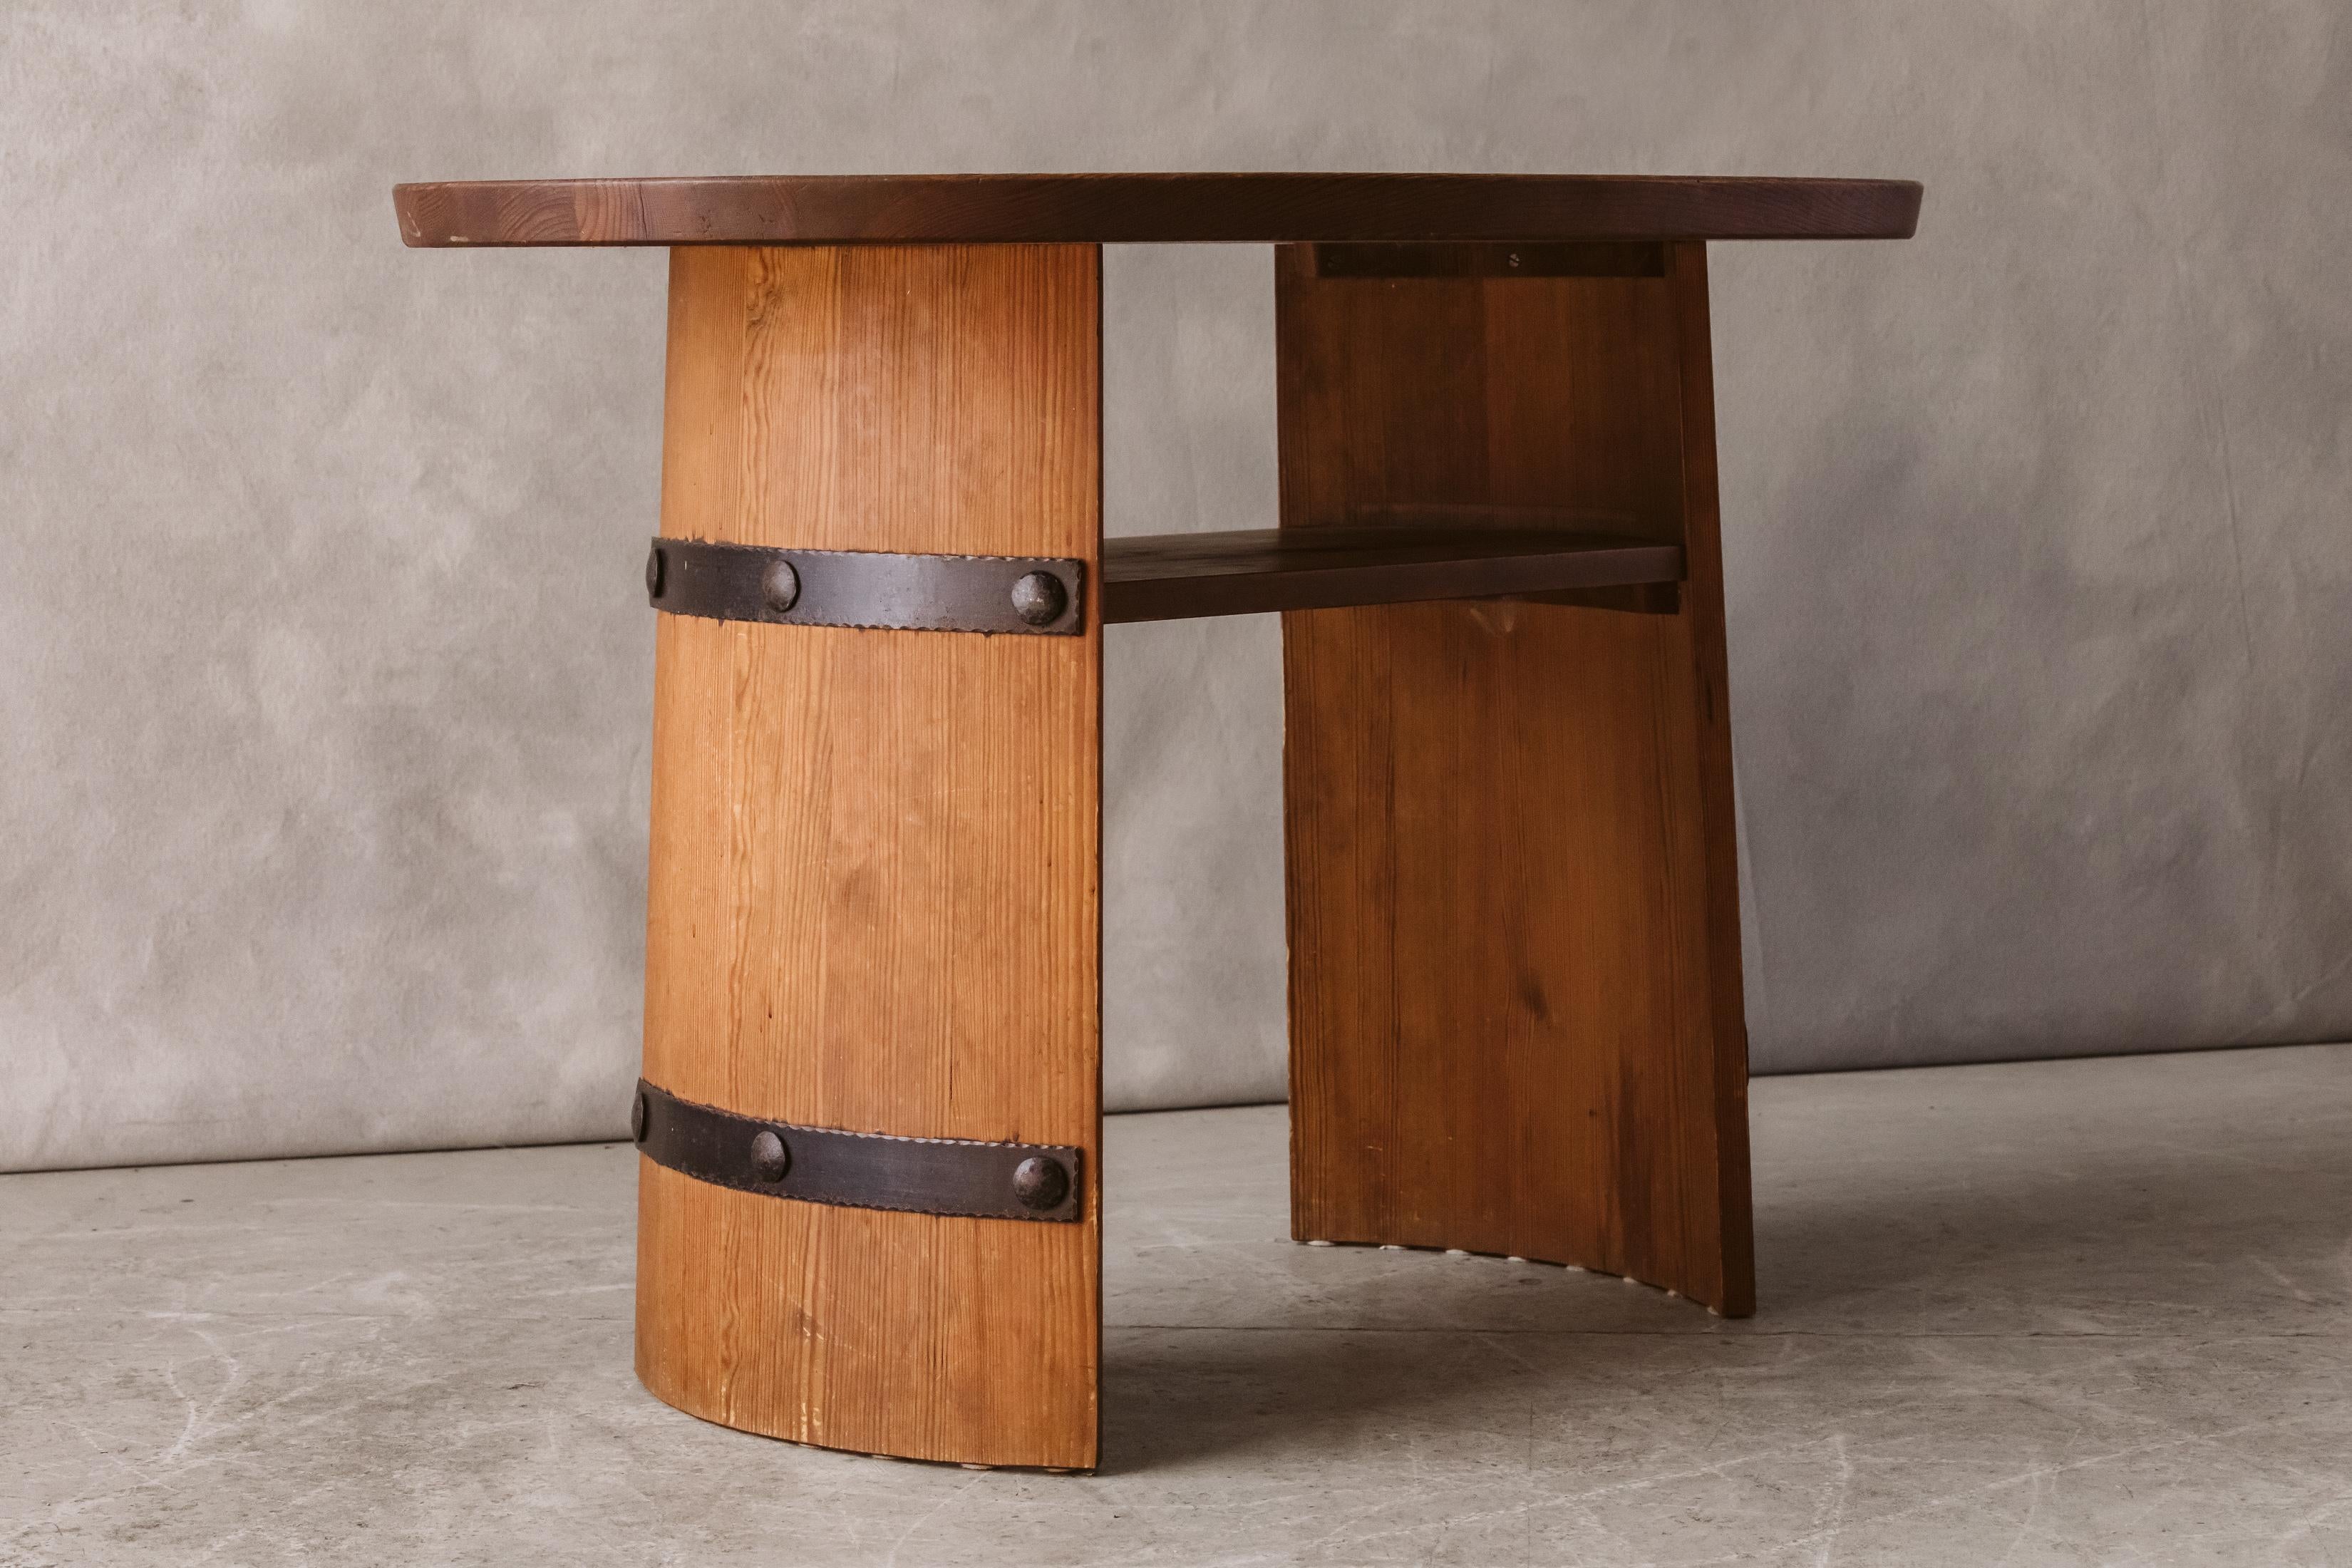 European Mid Century Pine Table From Sweden, Circa 1950 For Sale